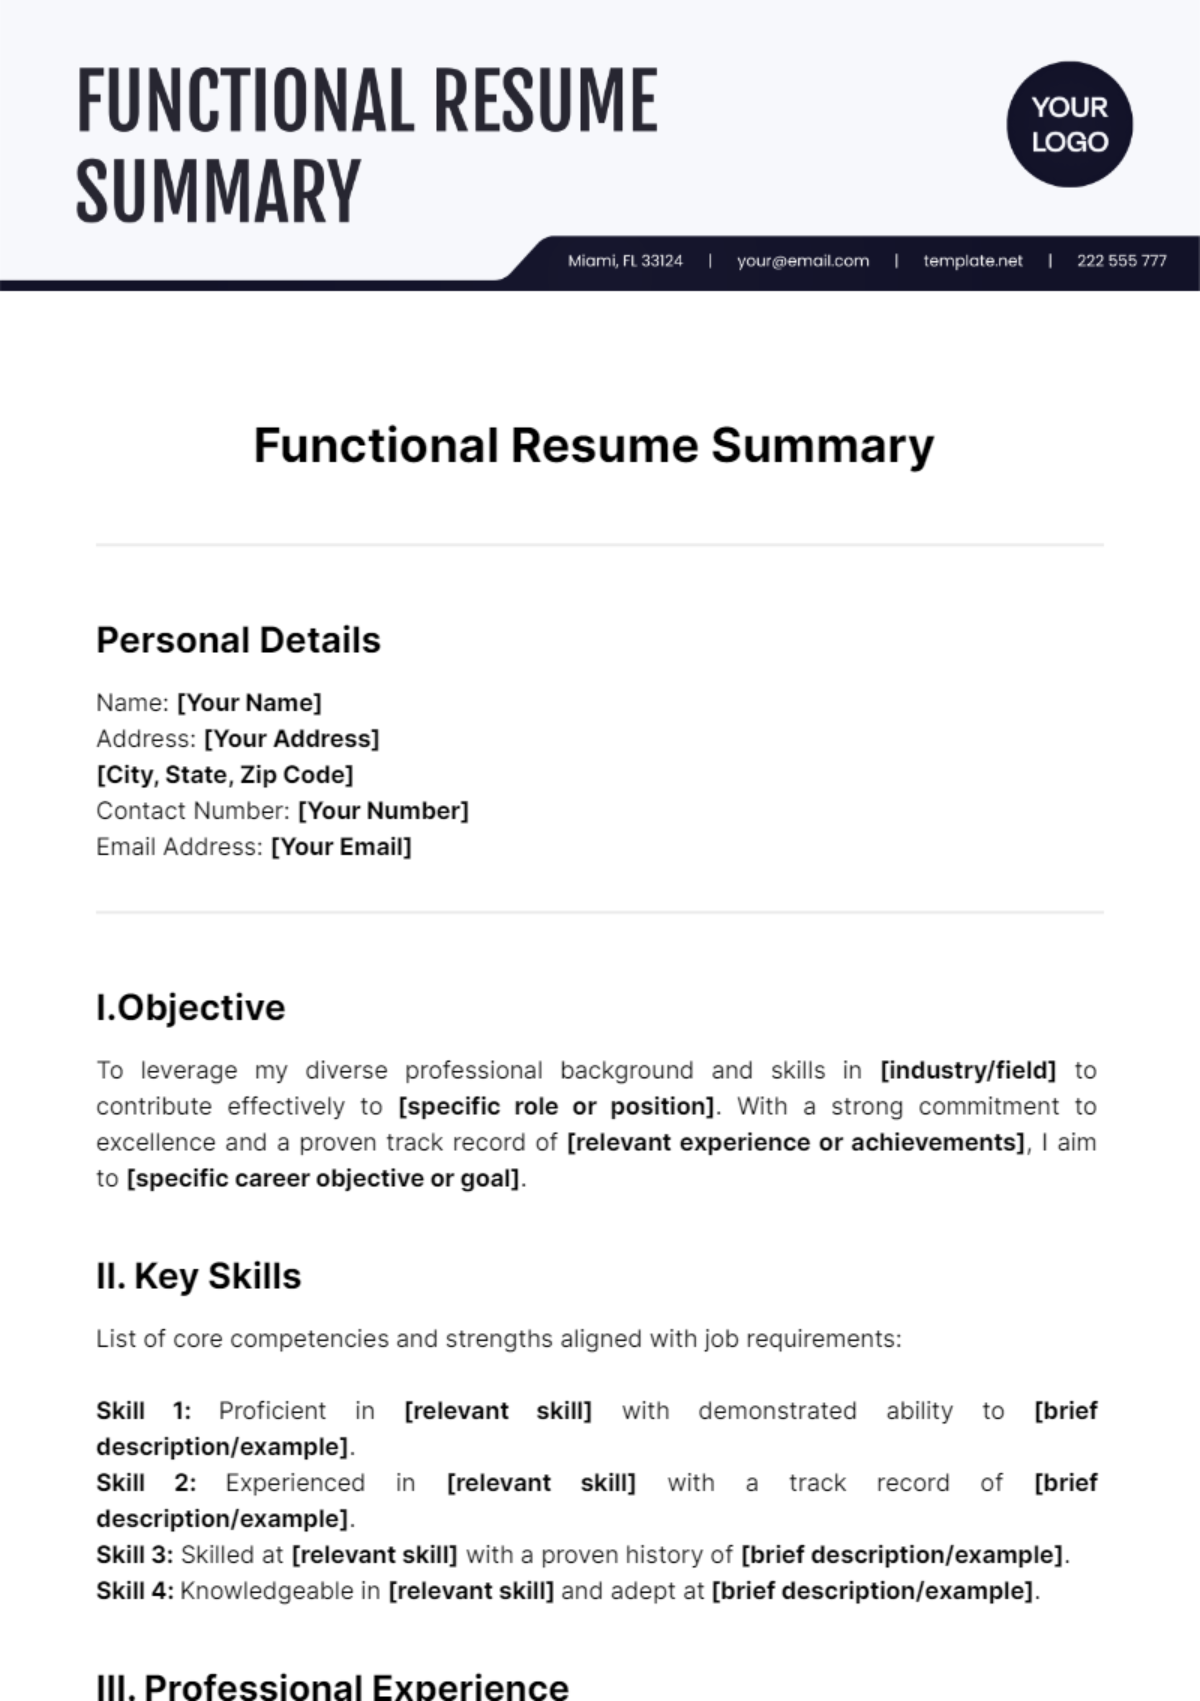 Functional Resume Summary Template